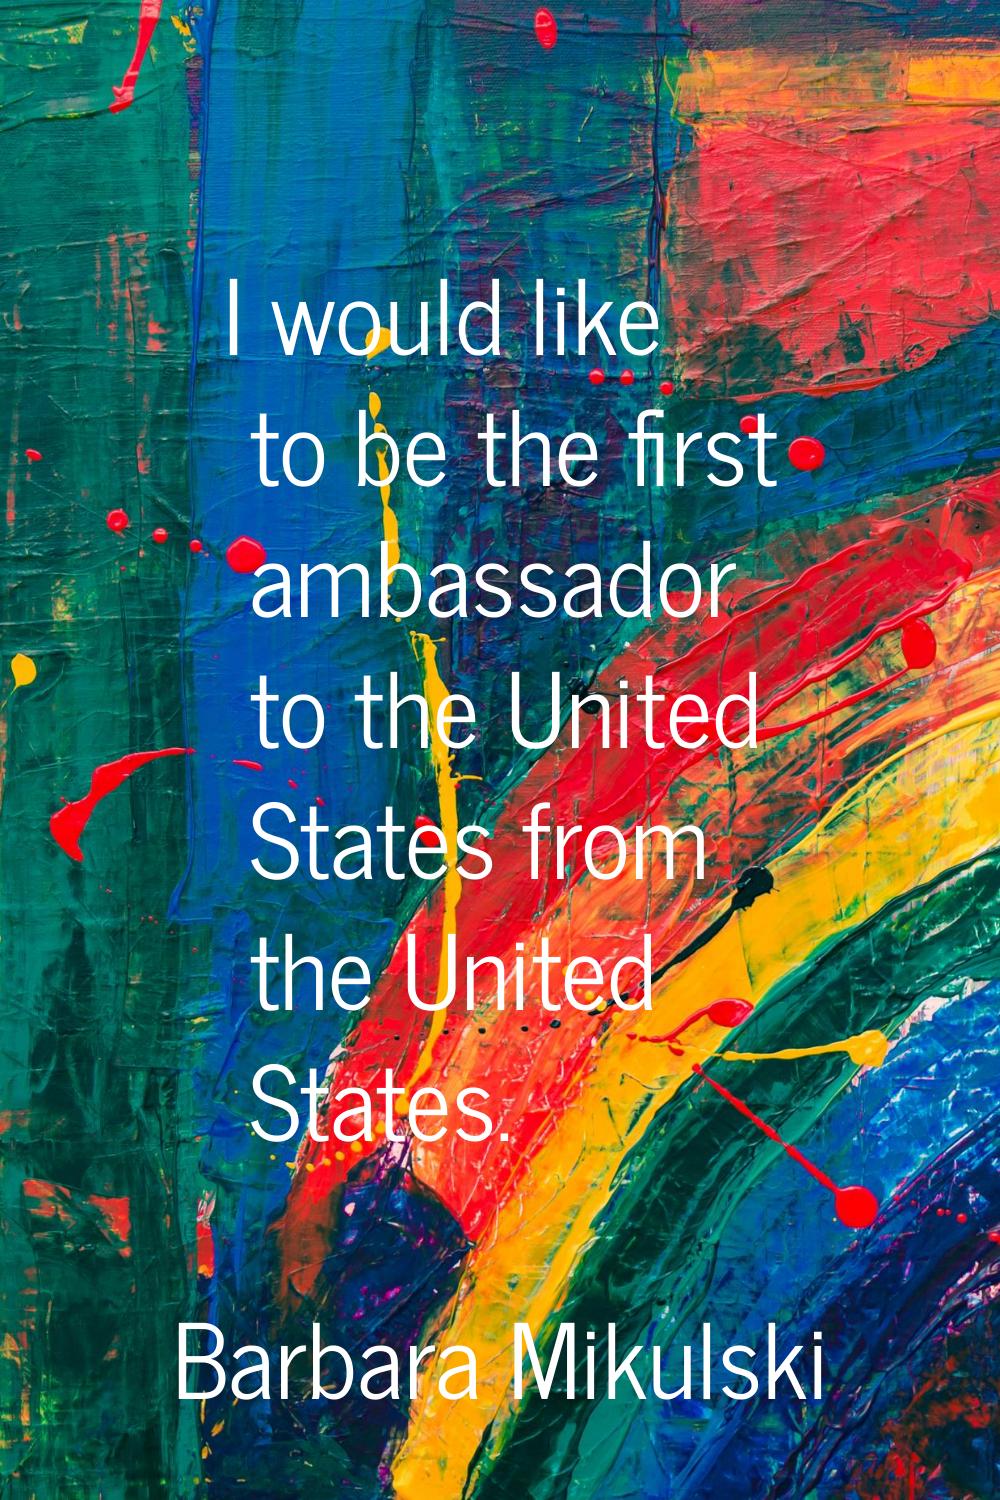 I would like to be the first ambassador to the United States from the United States.